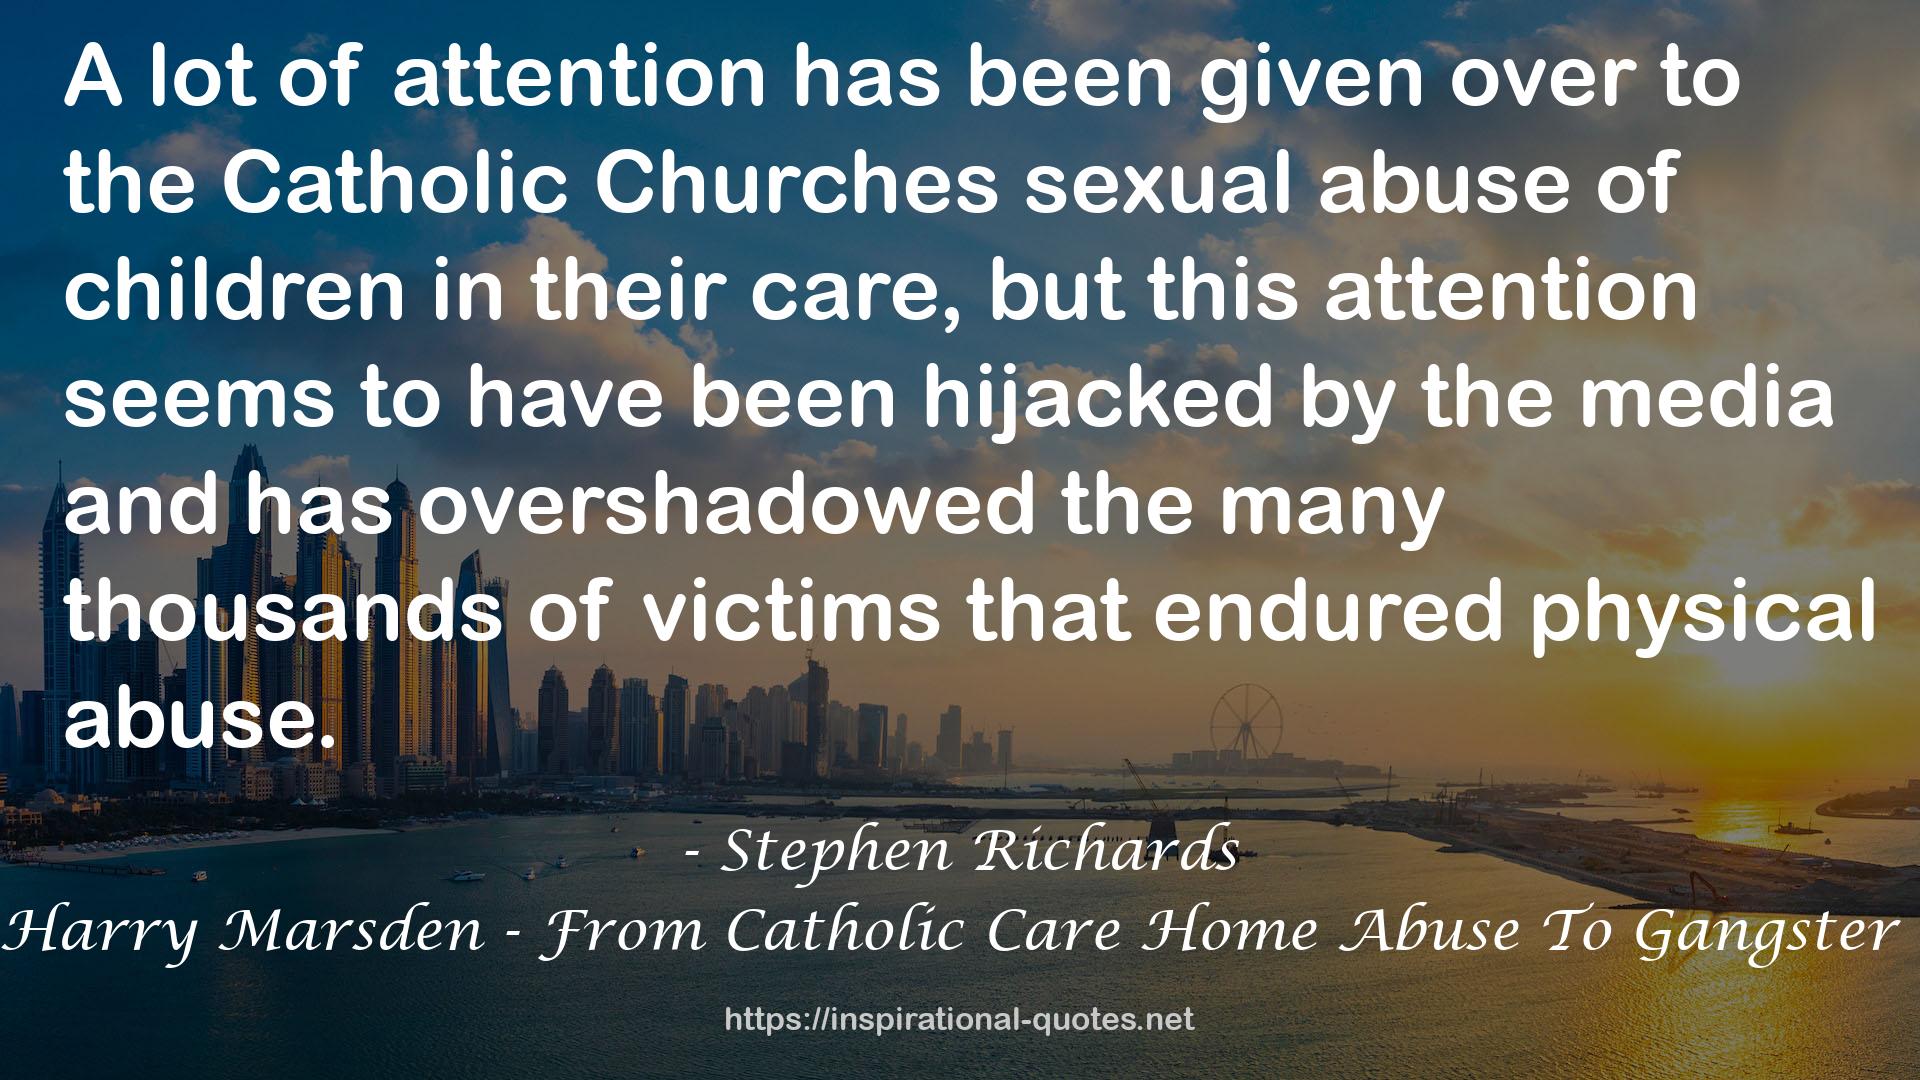 the Catholic Churches sexual abuse  QUOTES